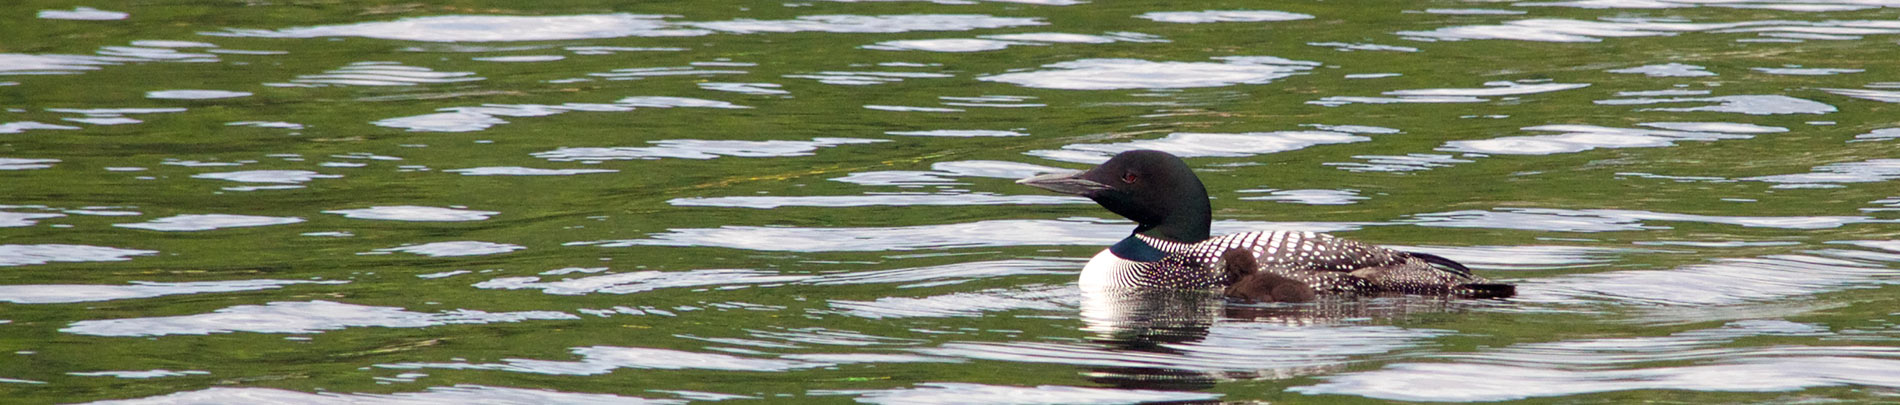 A loon with its baby swimming in the water.